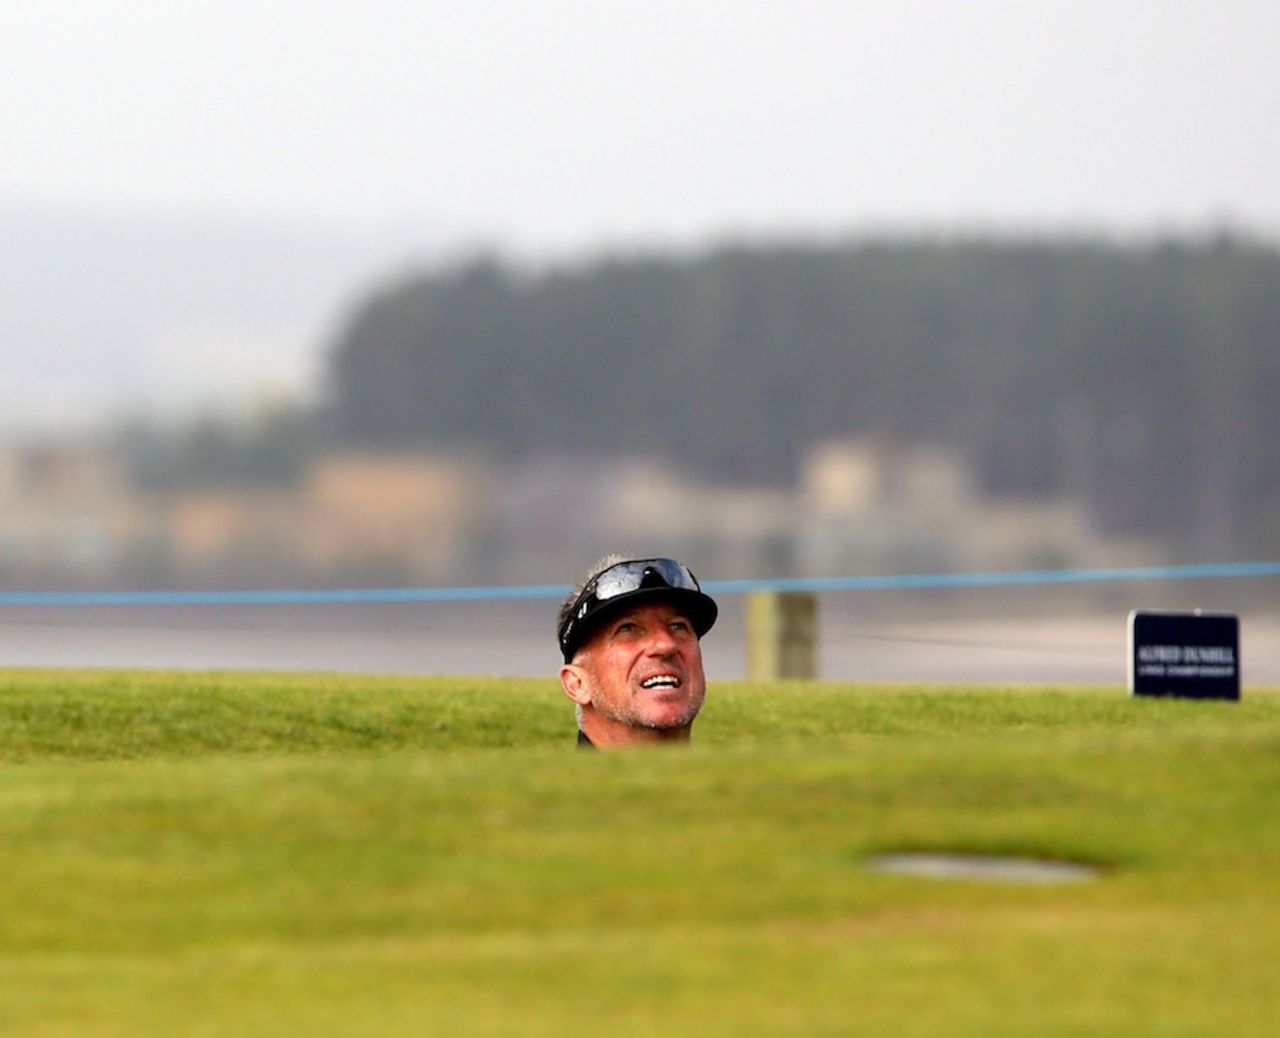 Ian Botham on the fairway during a golf competition in Scotland, Fife, September 29, 2013